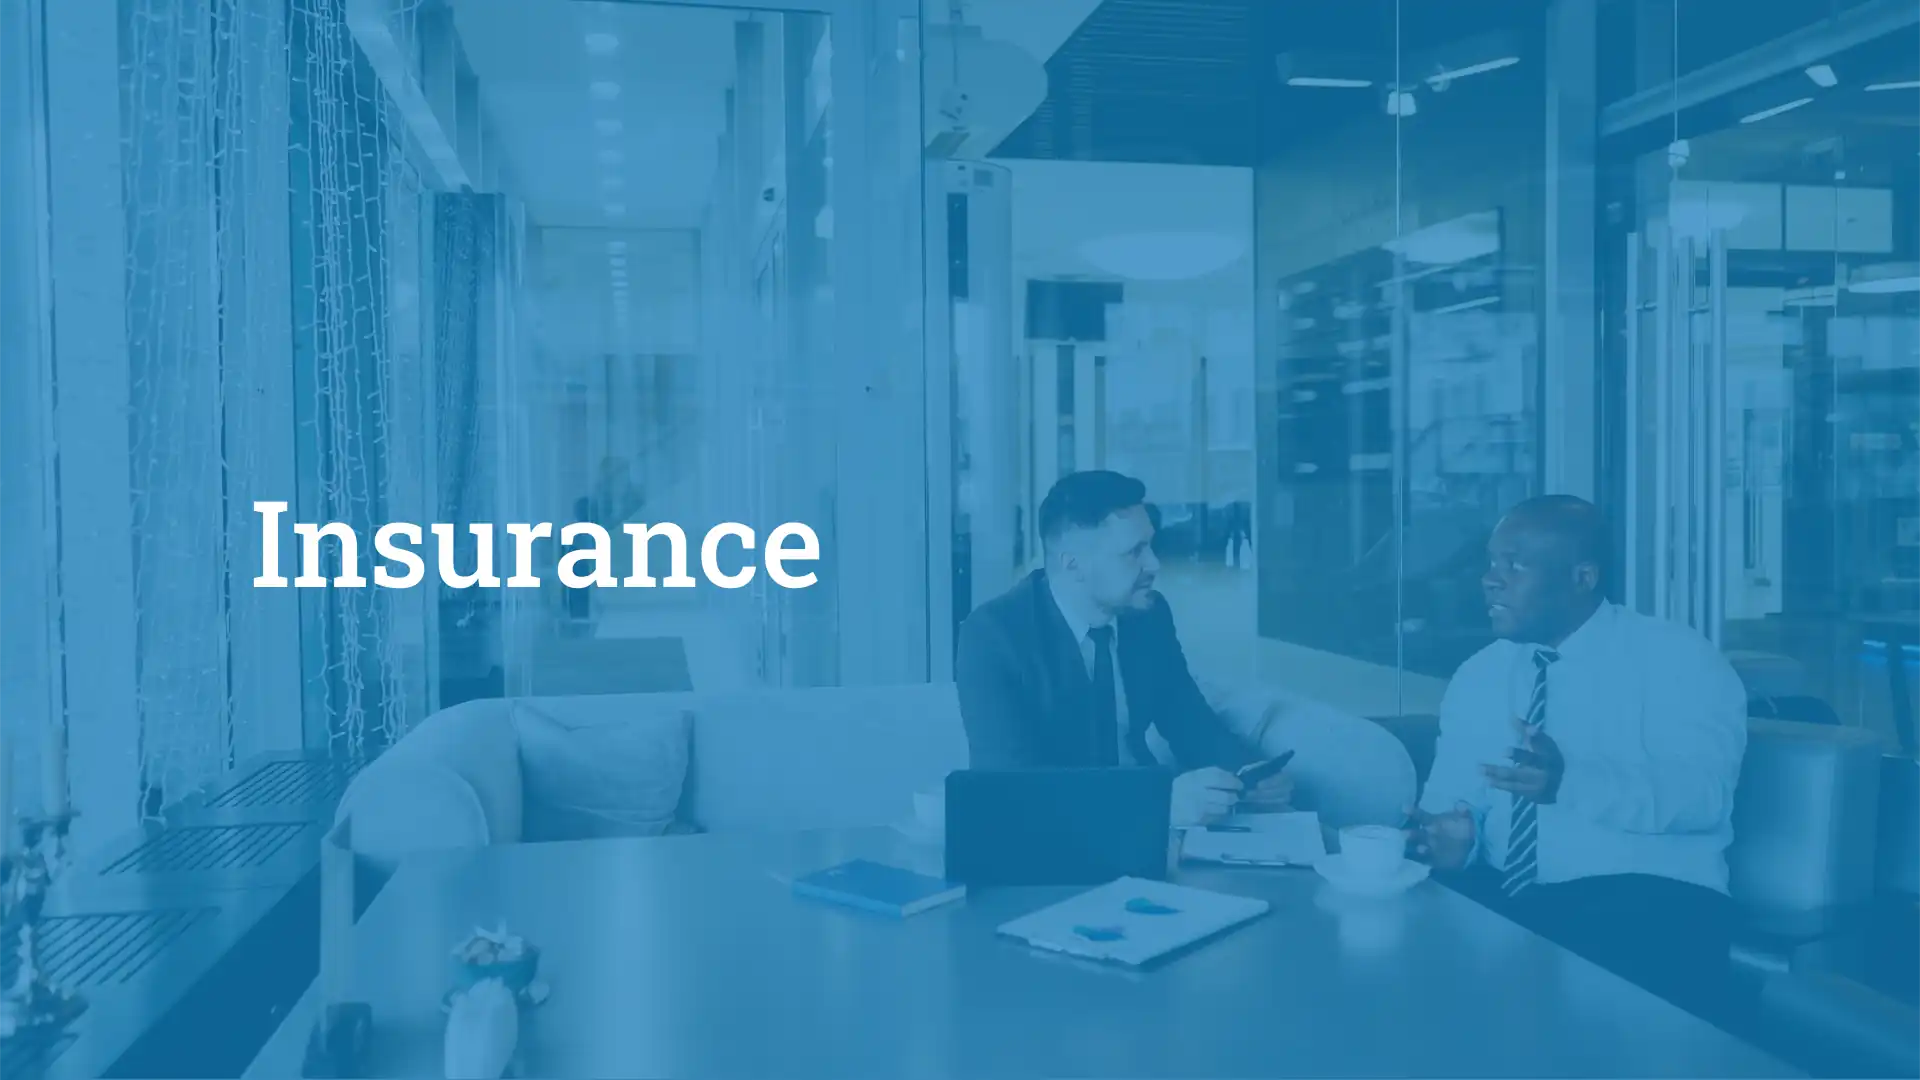 Insurance Industry Image